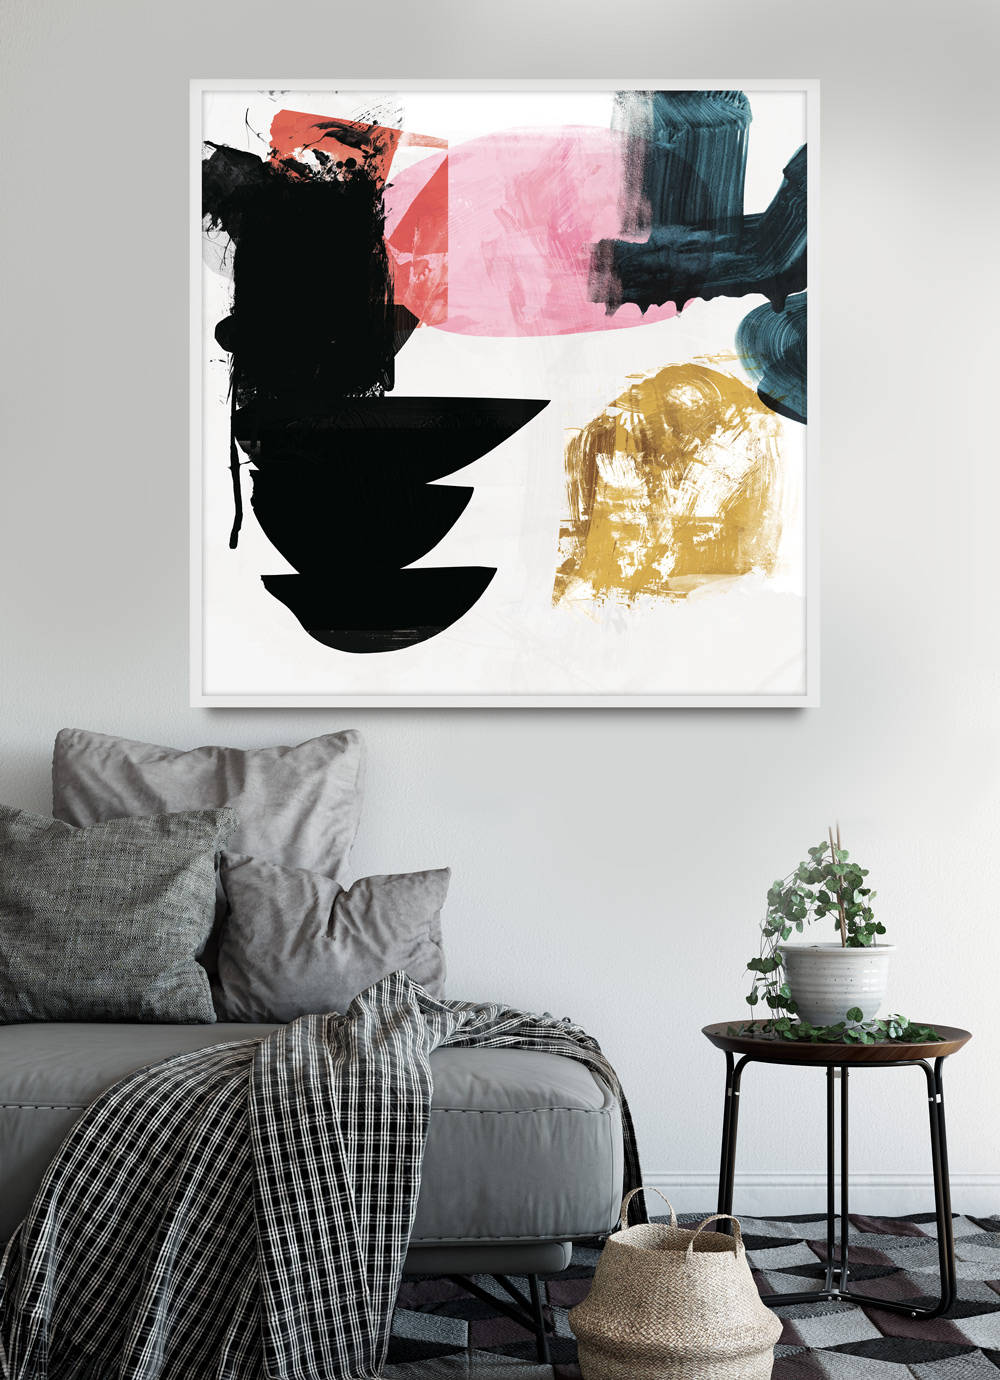 The 9 Best Etsy Shops for Stylish and Affordable Wall Art